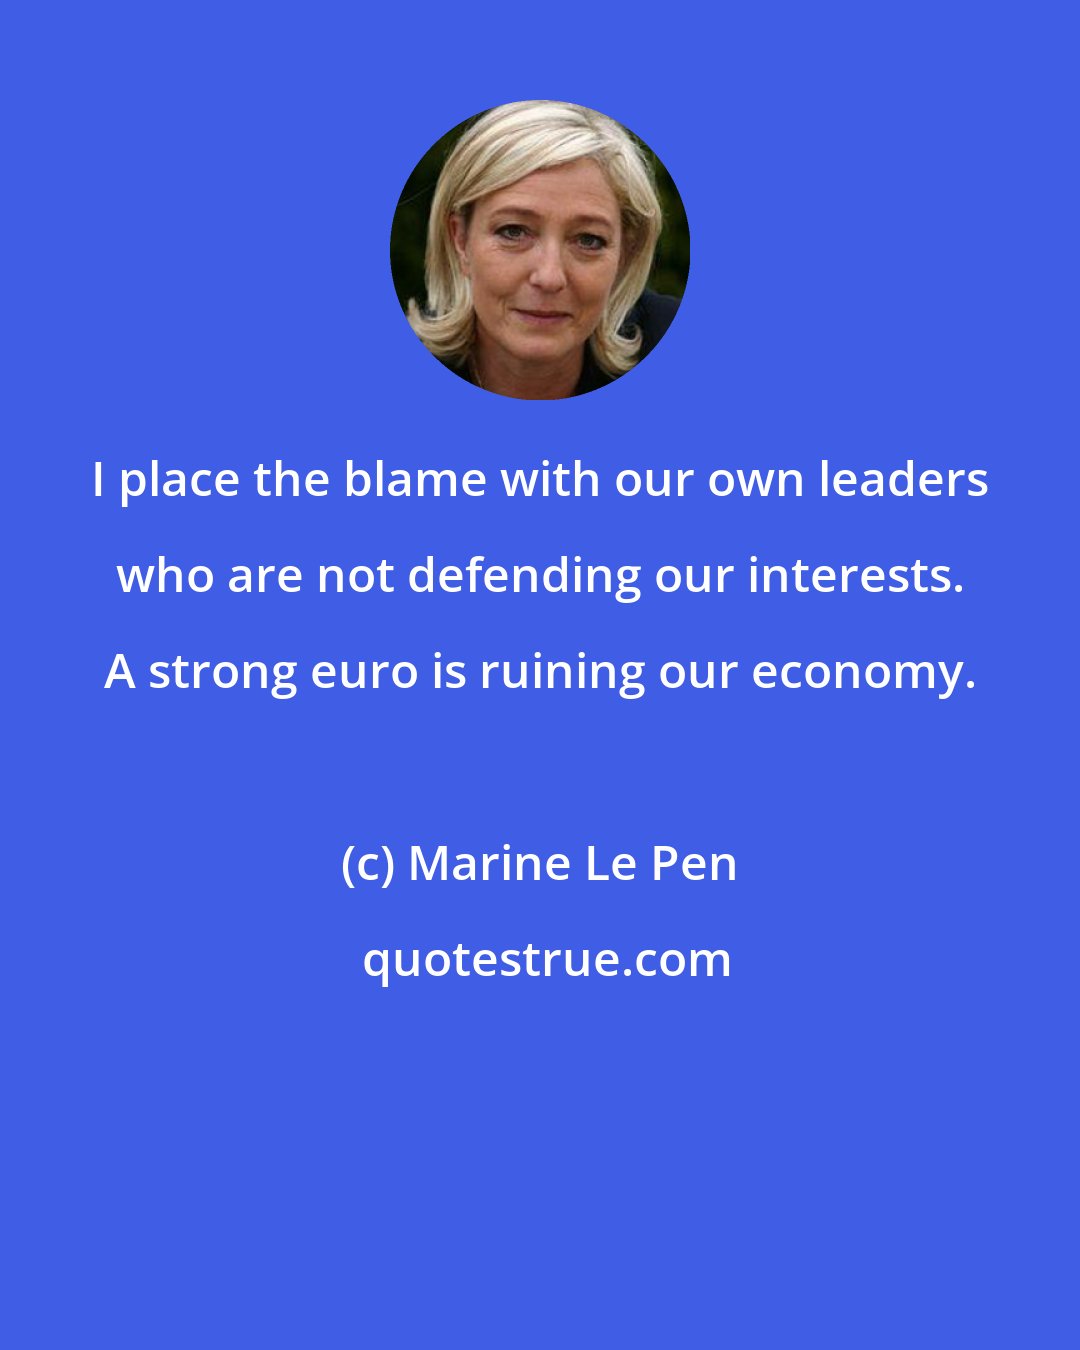 Marine Le Pen: I place the blame with our own leaders who are not defending our interests. A strong euro is ruining our economy.